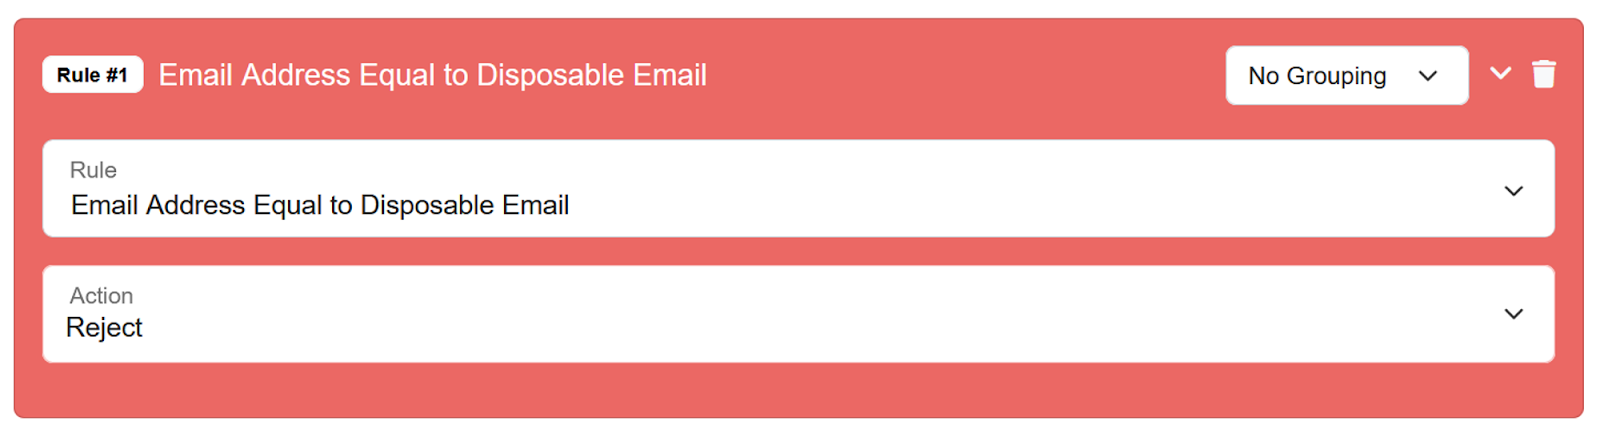 Disposable Email Validation